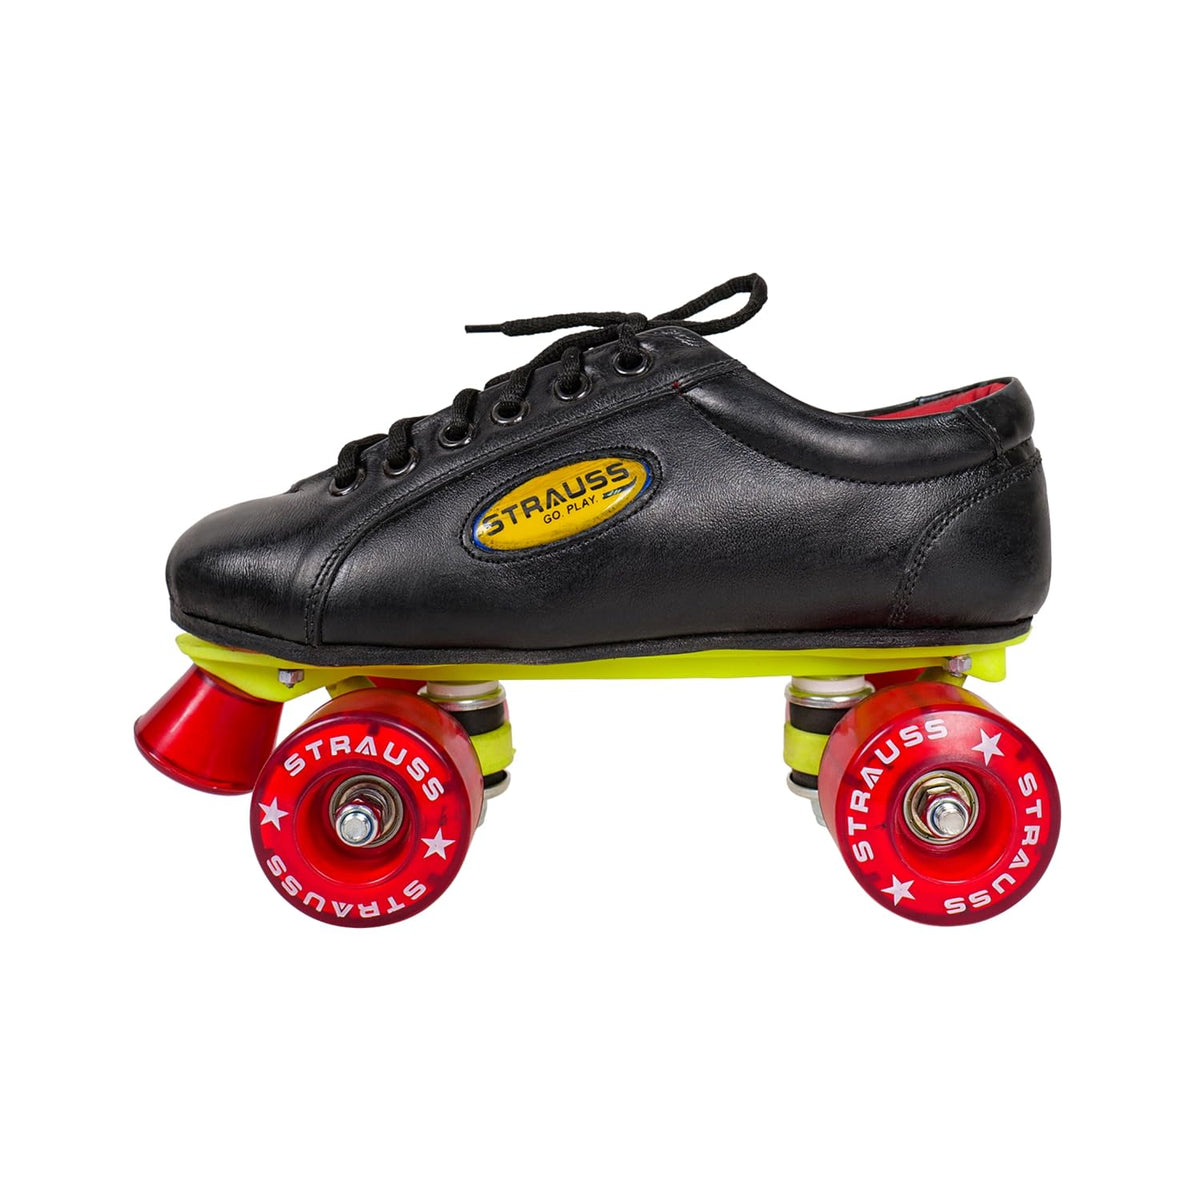 STRAUSS Gripper Skating Shoes | Fixed Body Roller Skates | Shoe Skate with PVC Wheel |Ideal for Boys, Girls and Kids |Suitable for All Skill Level | Ideal for Kids (10-11 Years),Size-3, (Red/Black)